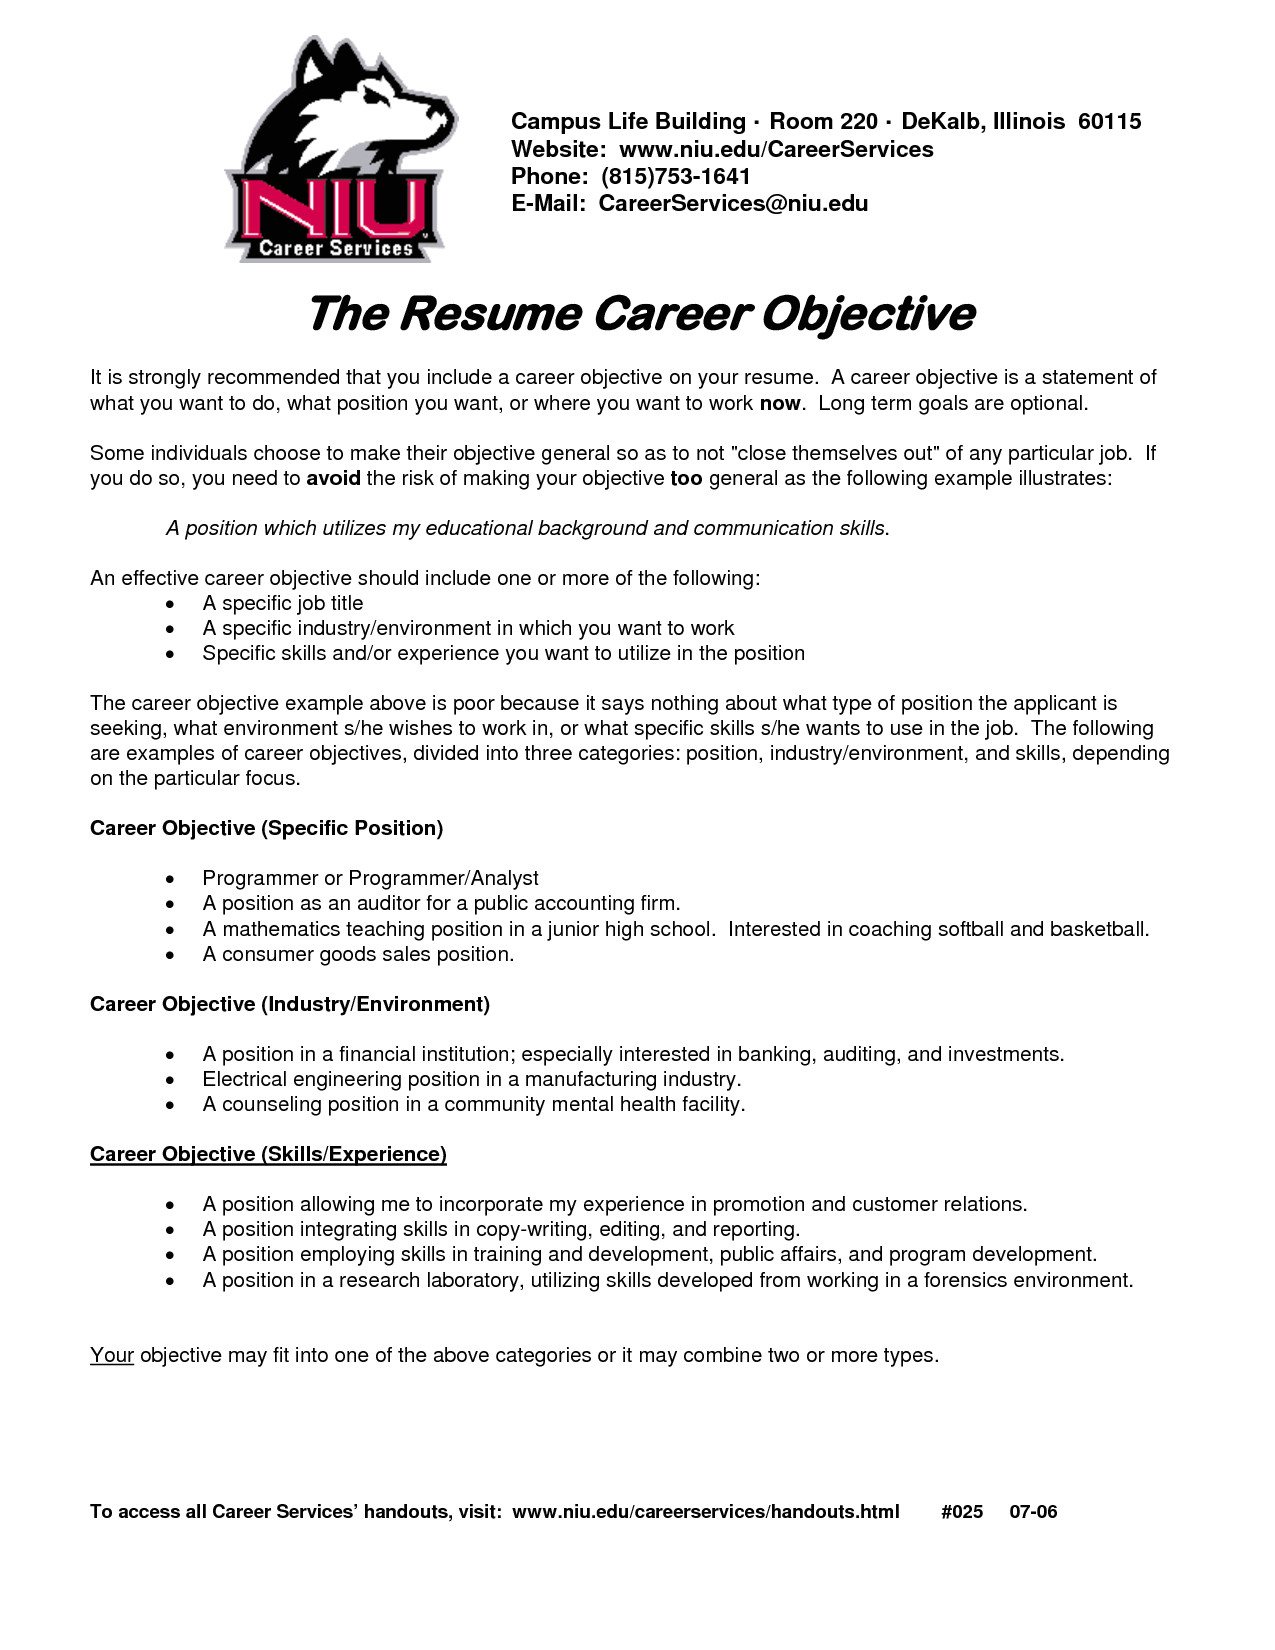 2016 resume objective example